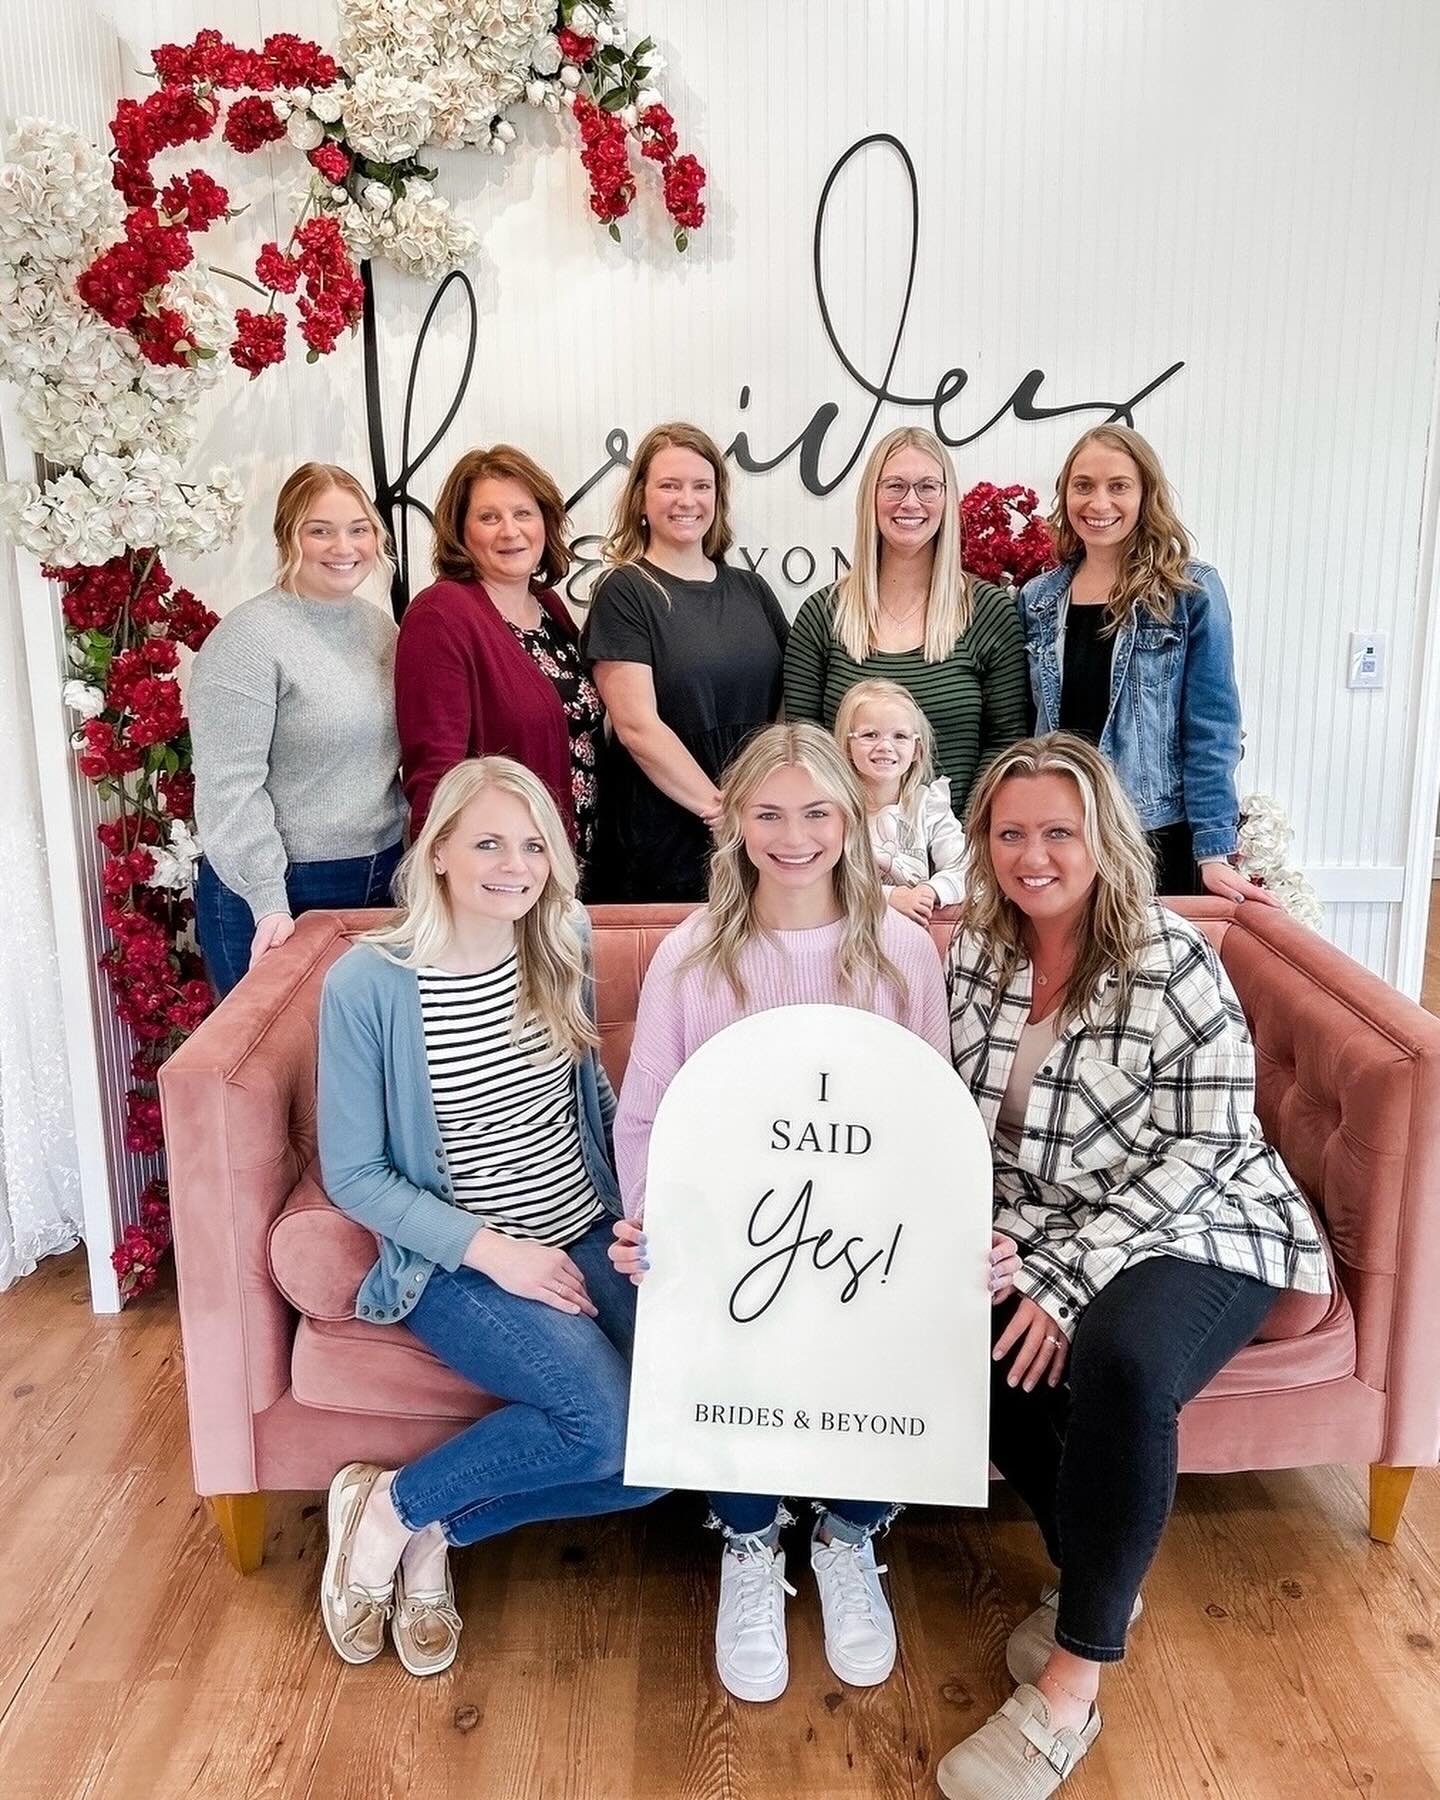 A few more of our stunning brides who have said yes recently. They all looked SO stunning in their dresses. 😍 
#bridesandbeyond #bridetobe #bride #justenaged #shesaidyes #yestothedress #ohiobride #indianabride #weddingdress #ohiobridalboutique